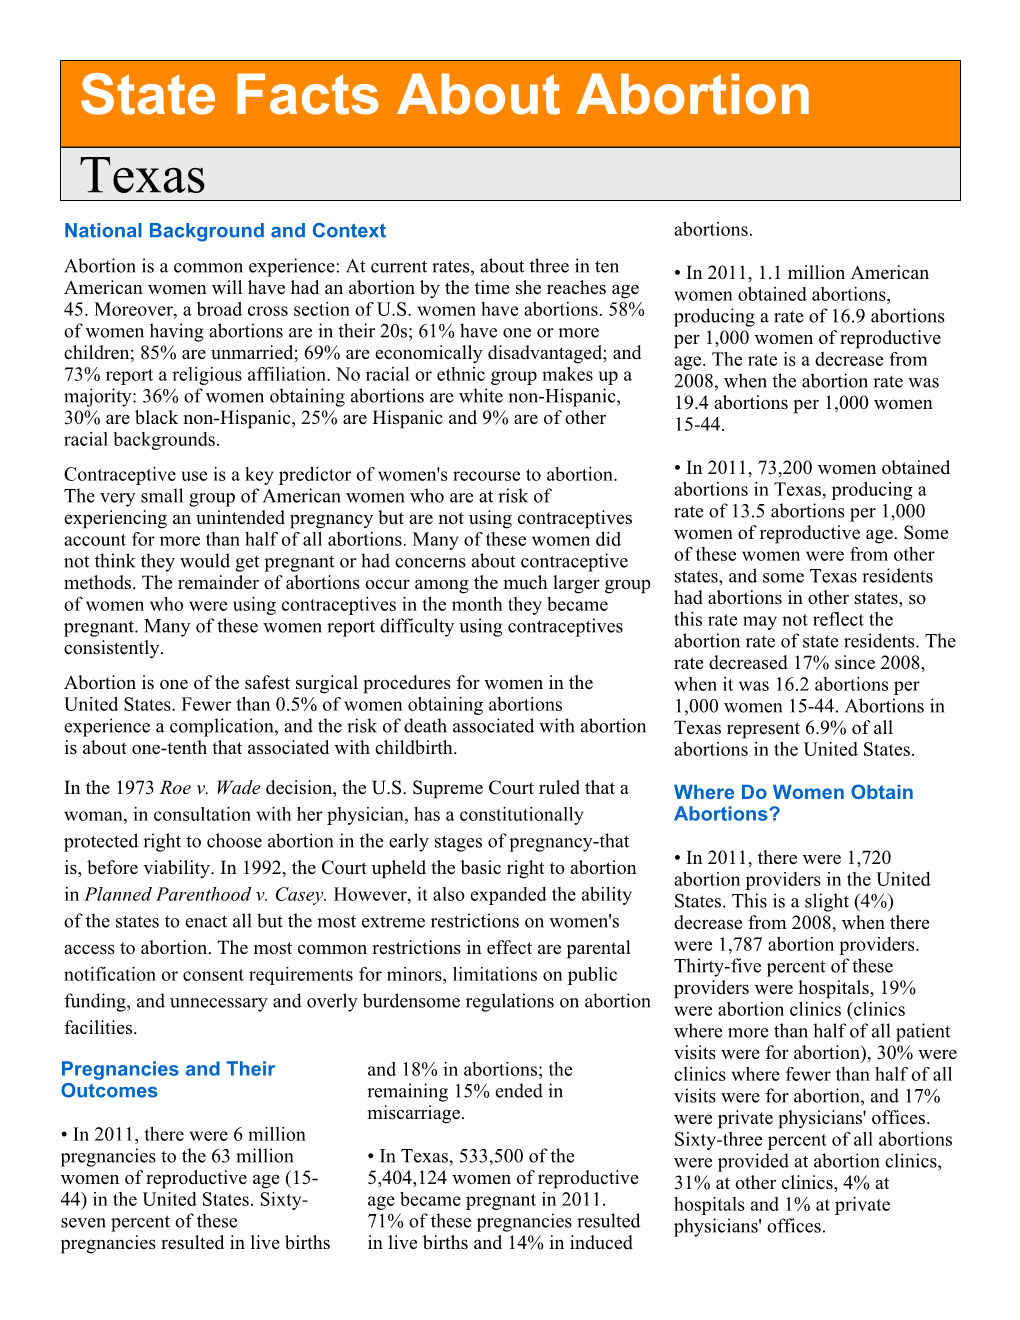 State Facts About Abortion Texas National Background and Context Abortions